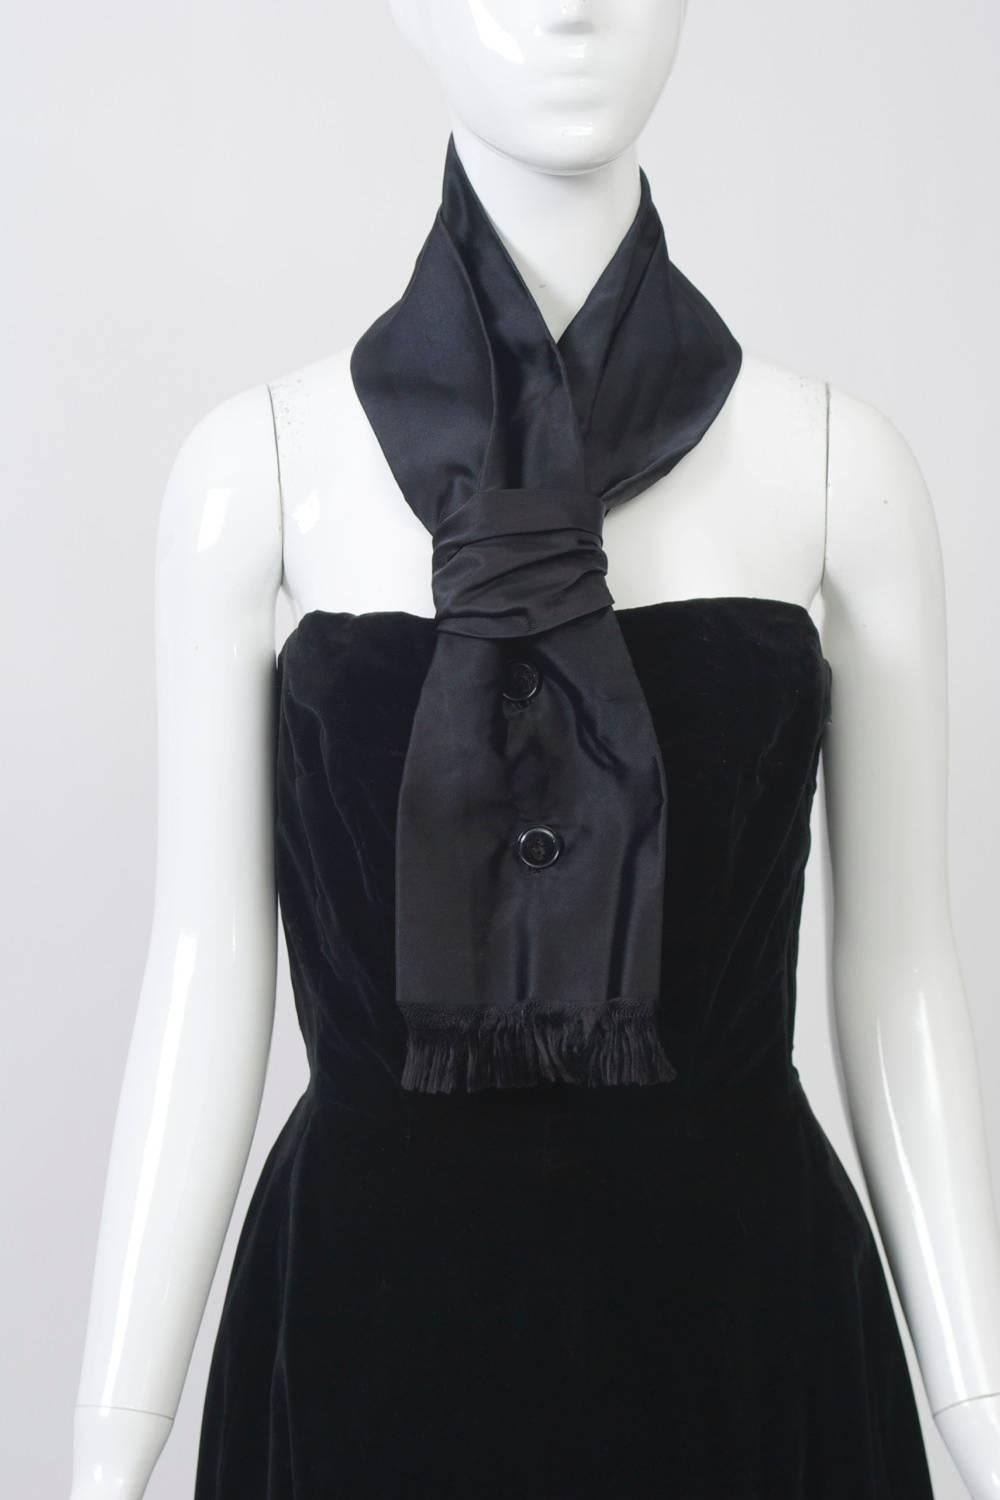 Suzanne Talbot Velvet Halter Dress In Excellent Condition For Sale In Alford, MA